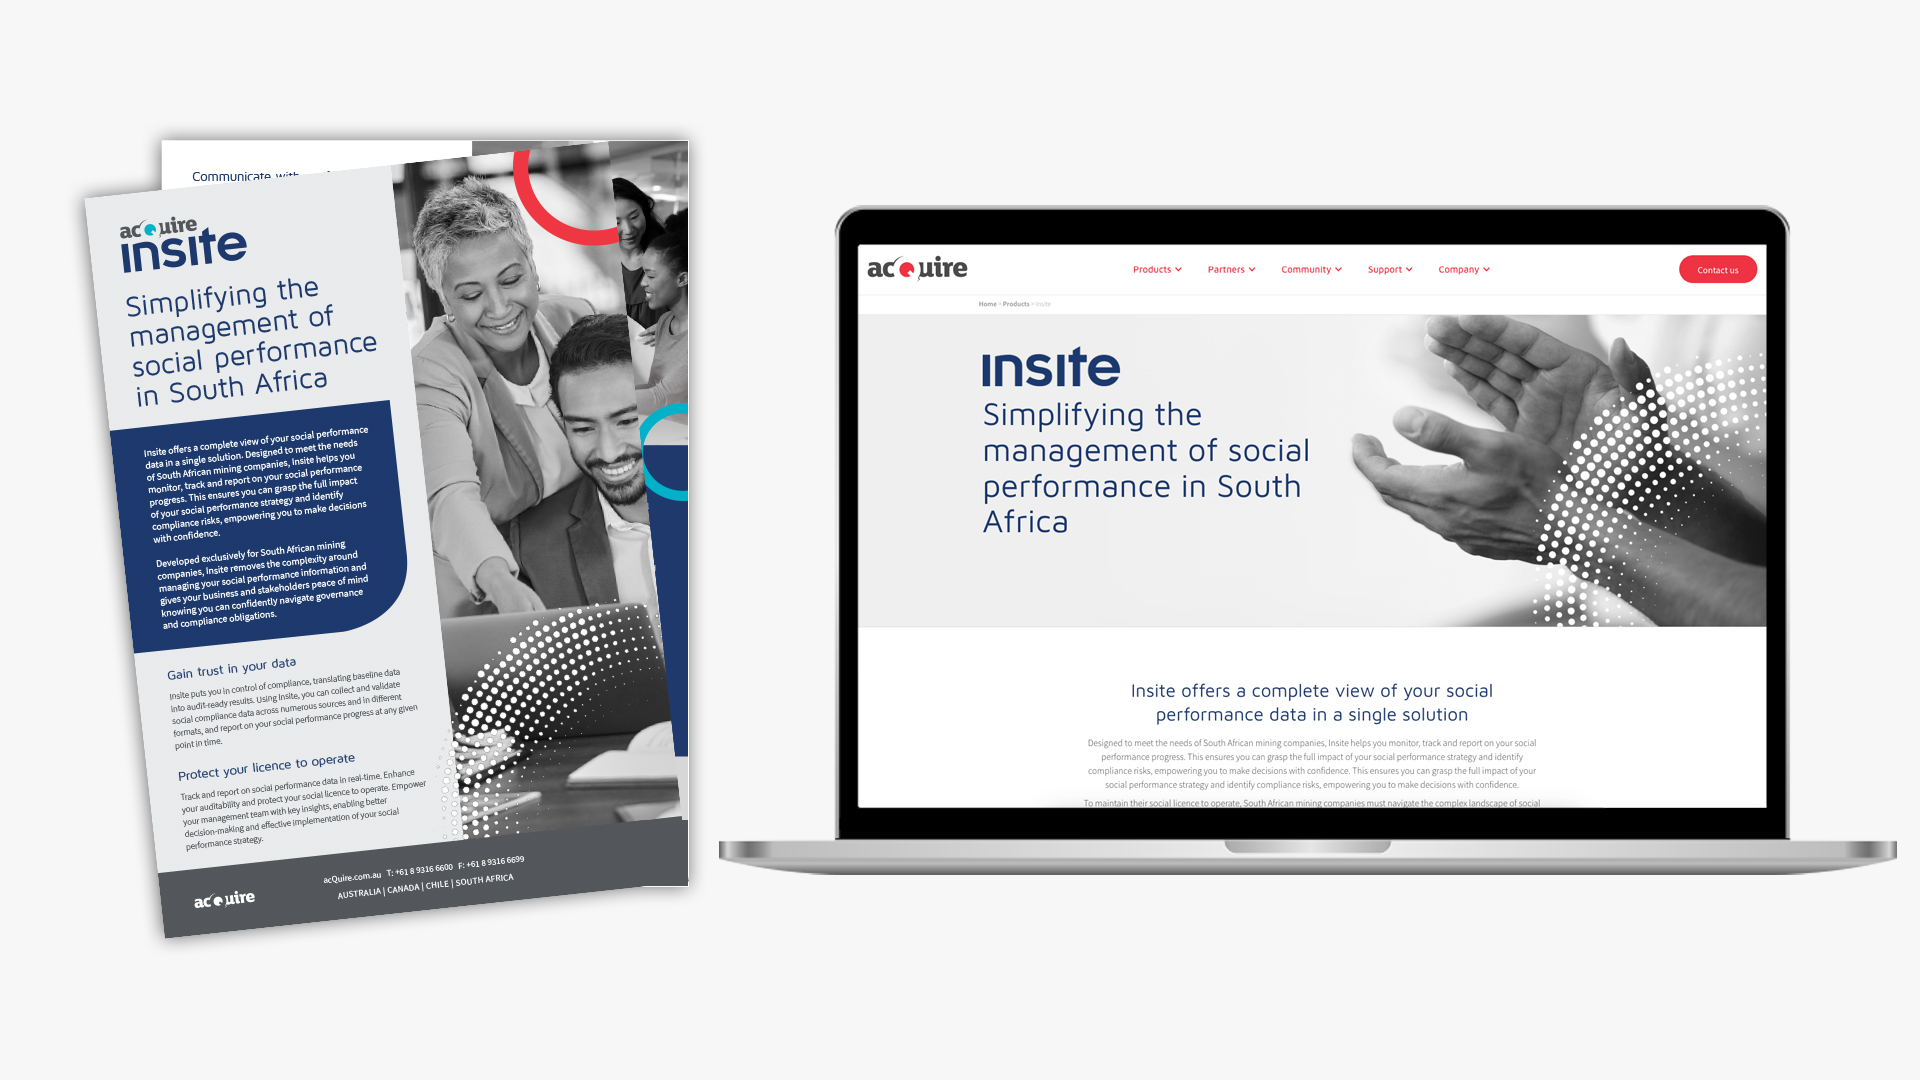 acQuire’s Insite product has entered a new chapter with the launch of an online help centre.